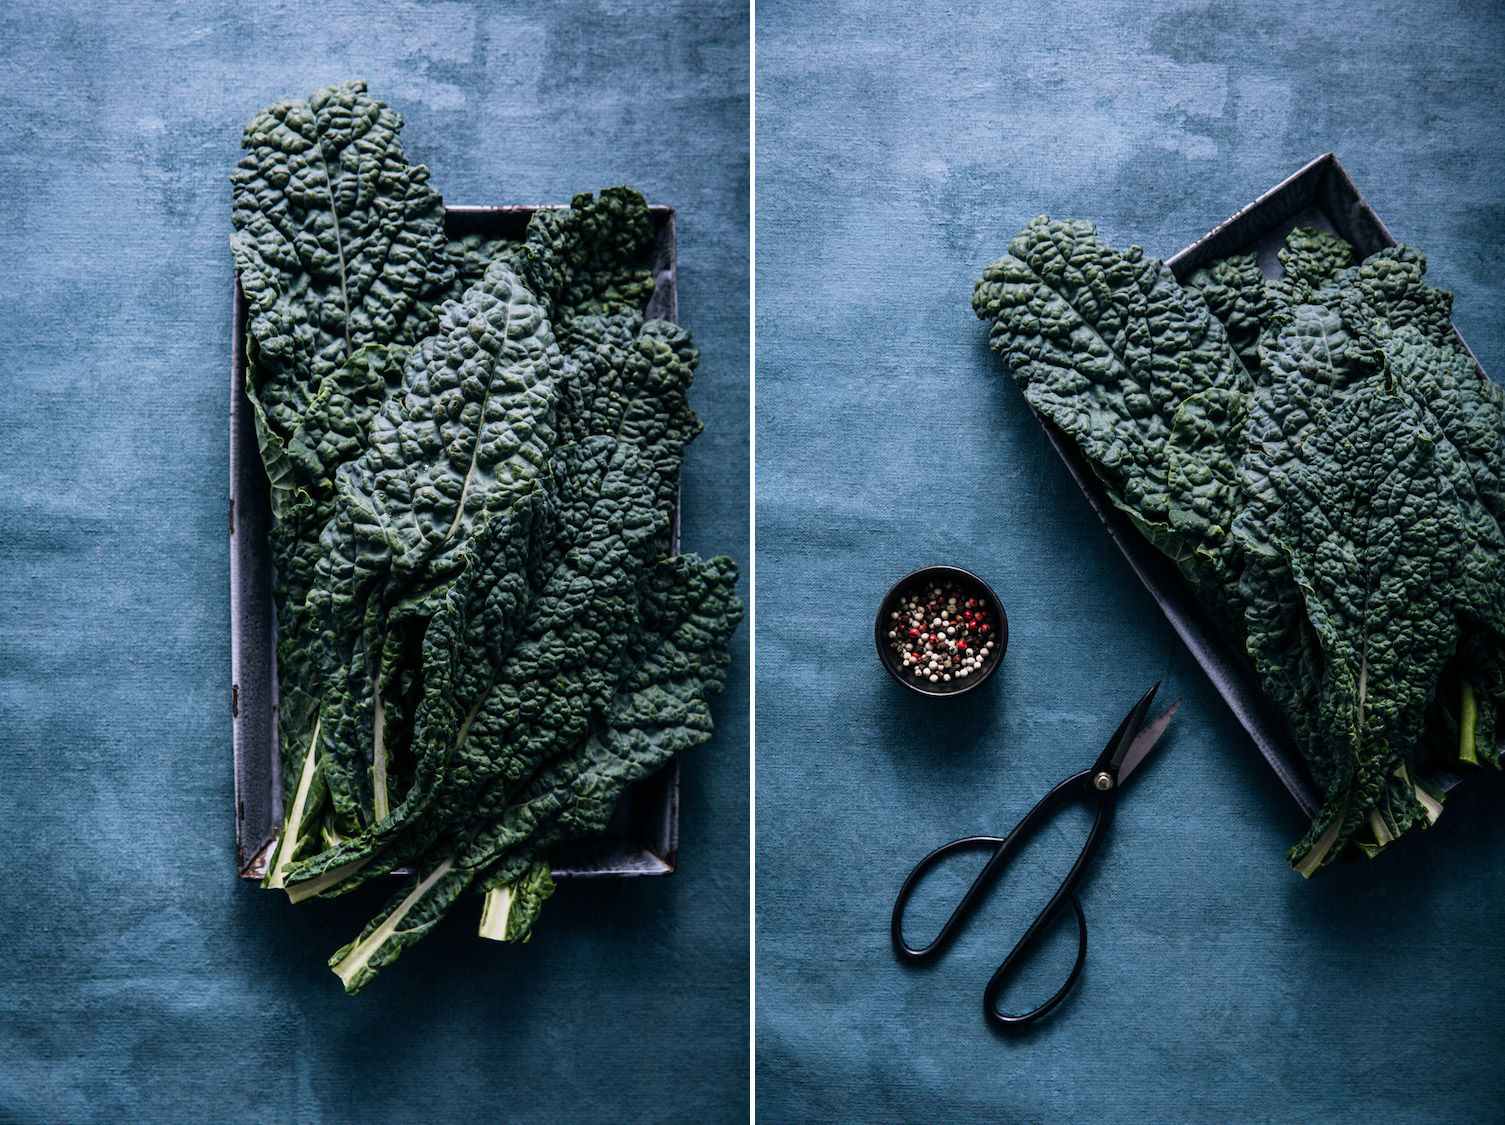 Your Workflow for Styling Food Photography